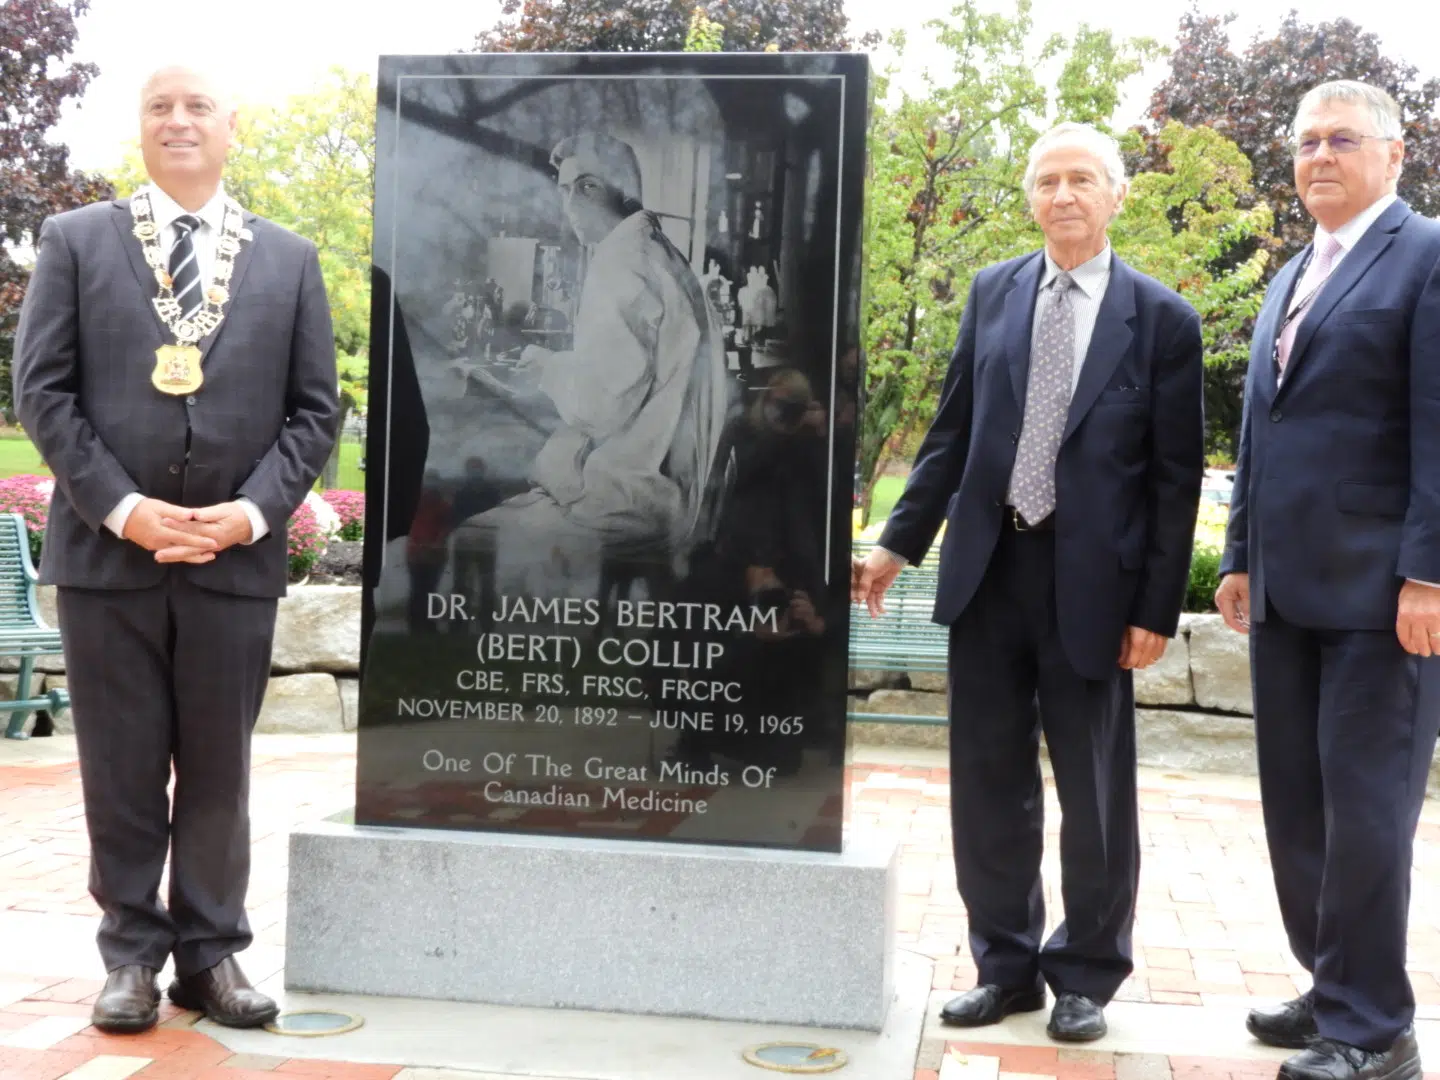 Dr. Collip monument and gardens unveiled